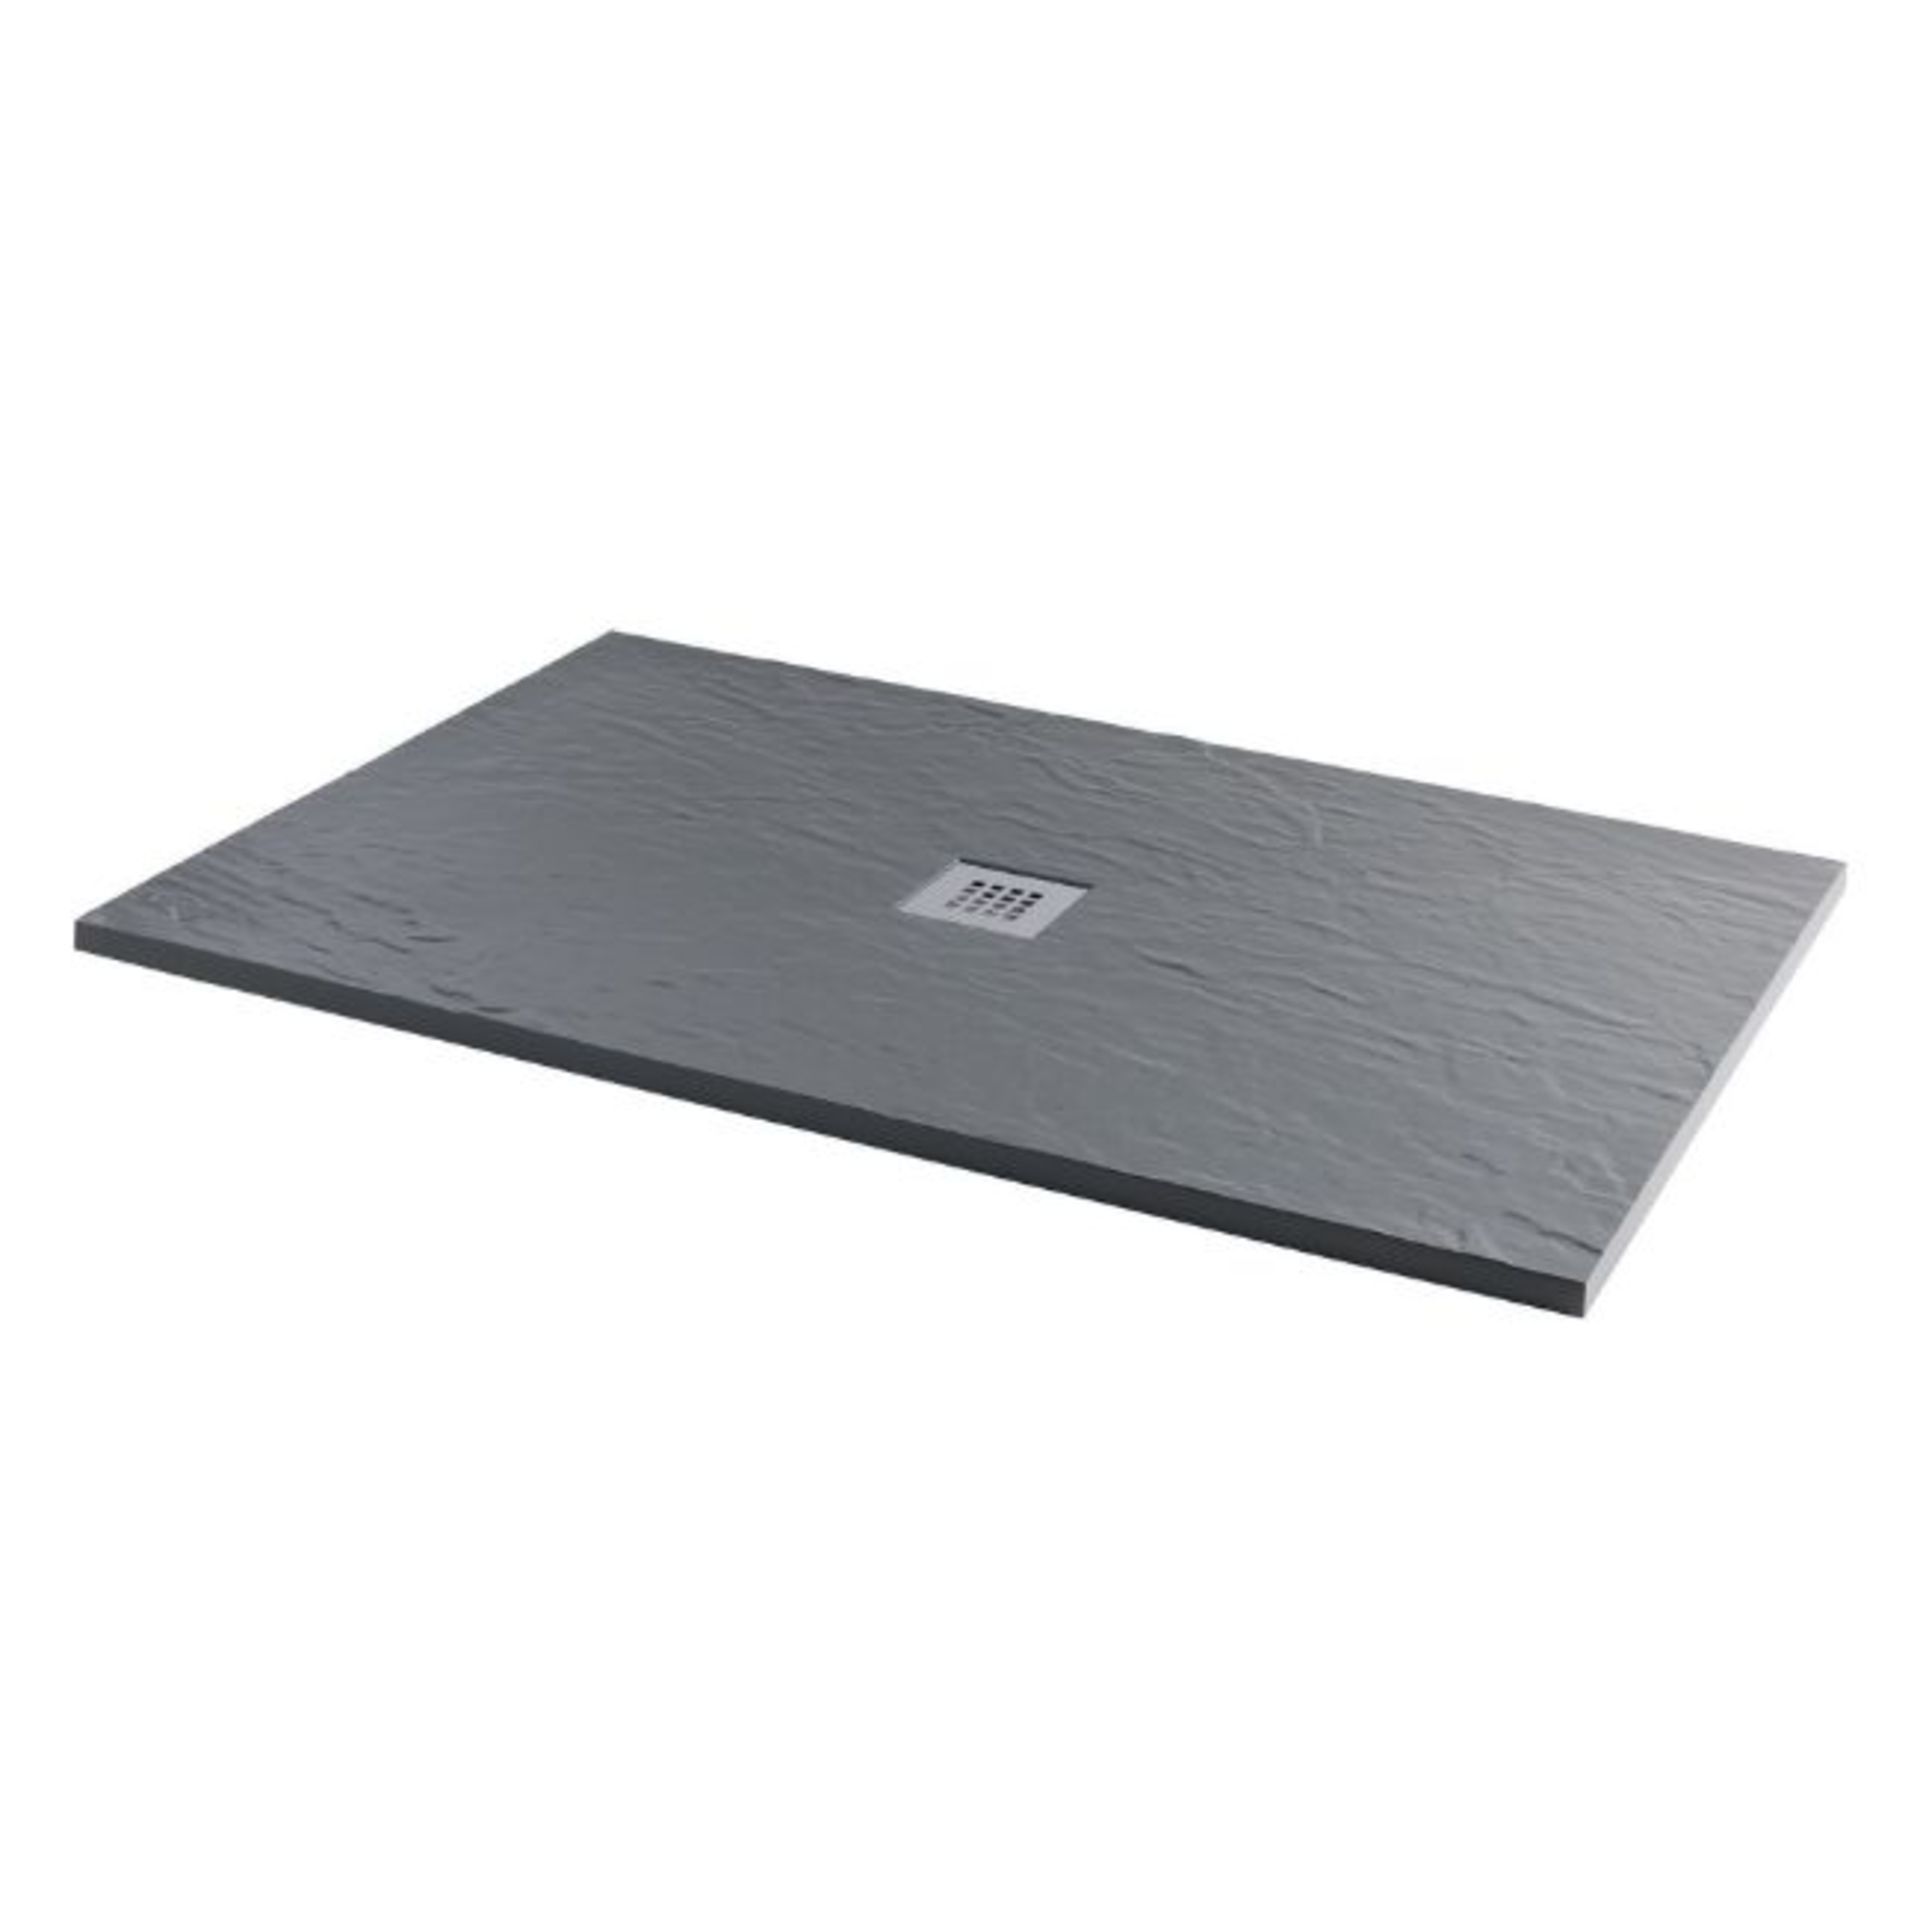 New 1200x800 mm Rectangular Slate Effect Shower Tray In Grey. Manufactured In The Uk From Hig... - Image 2 of 2